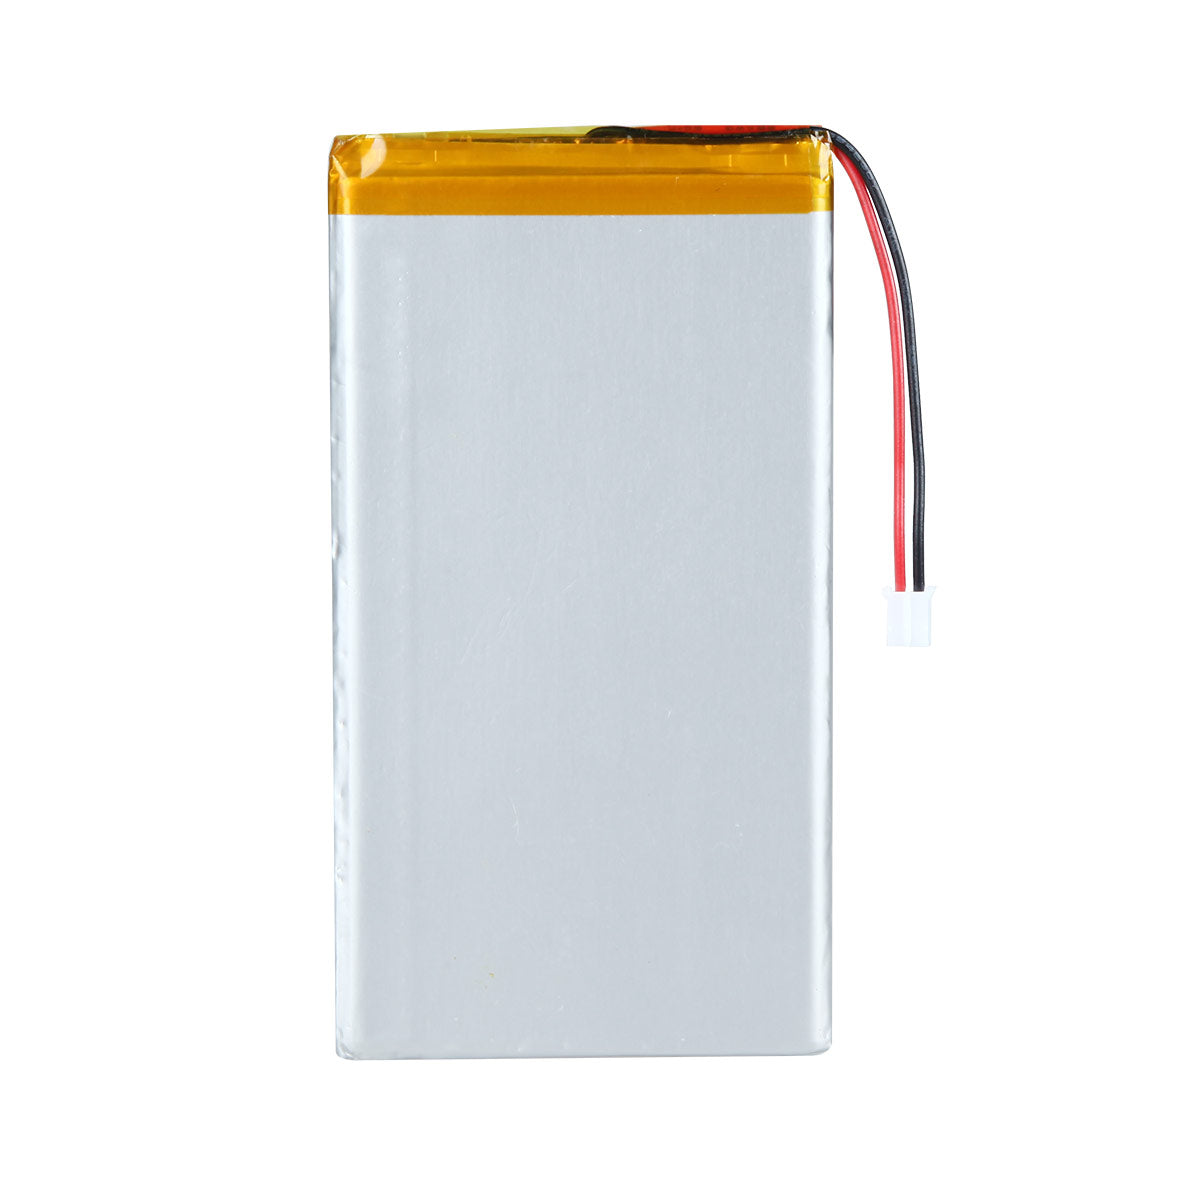 YDL 3.7V 8000mAh 7565121 Rechargeable Lithium  Polymer Battery